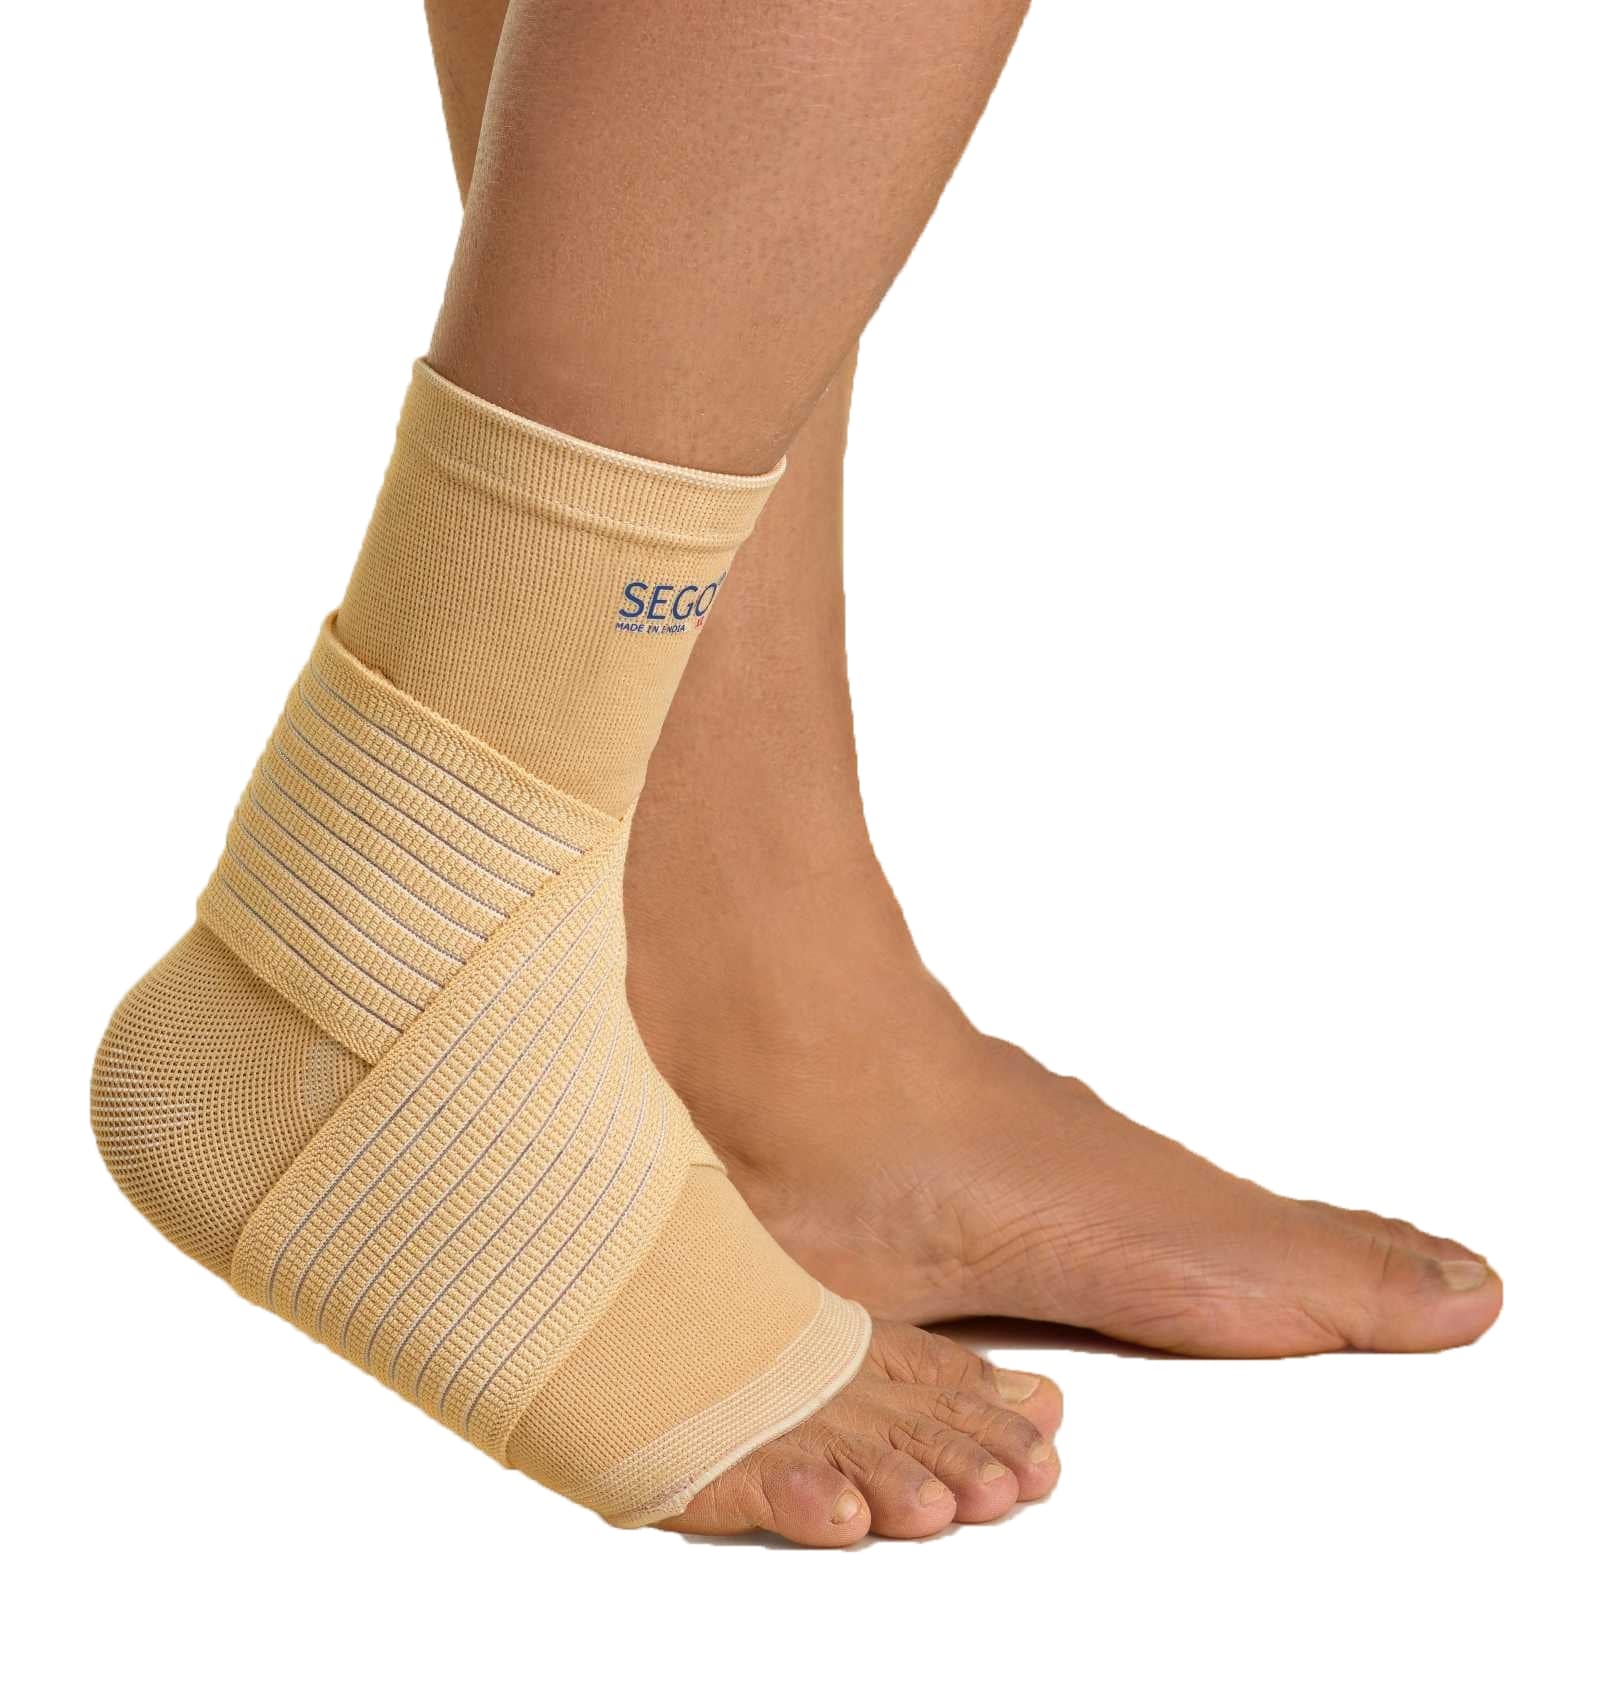 buy online 	Ankle Support Sego Breath - Dyna 22 - Large  Qatar Doha